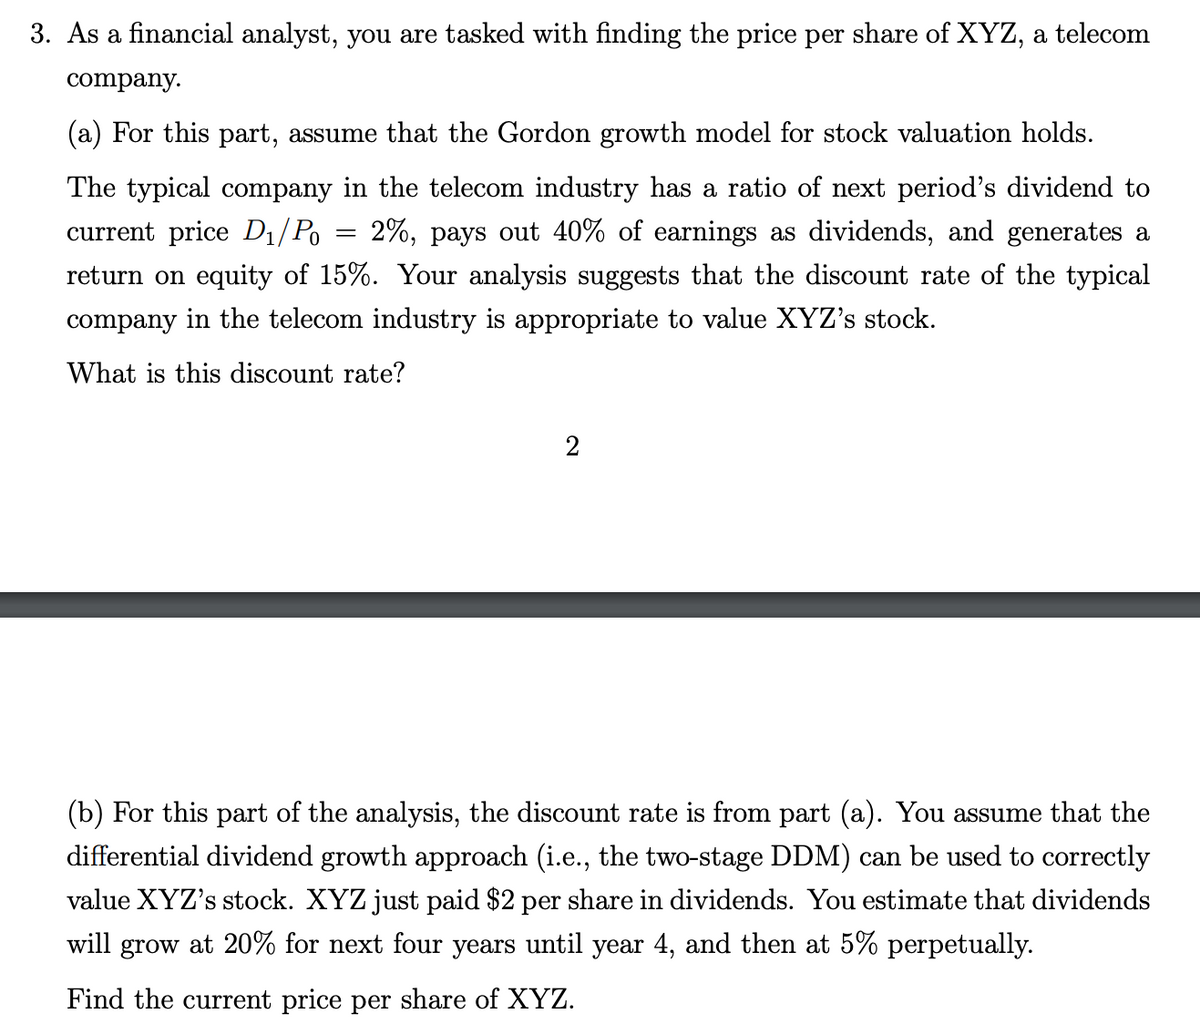 3. As a financial analyst, you are tasked with finding the price per share of XYZ, a telecom
company.
(a) For this part, assume that the Gordon growth model for stock valuation holds.
The typical company in the telecom industry has a ratio of next period's dividend to
2%, pays out 40% of earnings as dividends, and generates a
return on equity of 15%. Your analysis suggests that the discount rate of the typical
current price D1/Po
company in the telecom industry is appropriate to value XYZ's stock.
What is this discount rate?
2
(b) For this part of the analysis, the discount rate is from part (a). You assume that the
differential dividend growth approach (i.e., the two-stage DDM) can be used to correctly
value XYZ's stock. XYZ just paid $2 per share in dividends. You estimate that dividends
will grow at 20% for next four years until year 4, and then at 5% perpetually.
Find the current price per share of XYZ.
